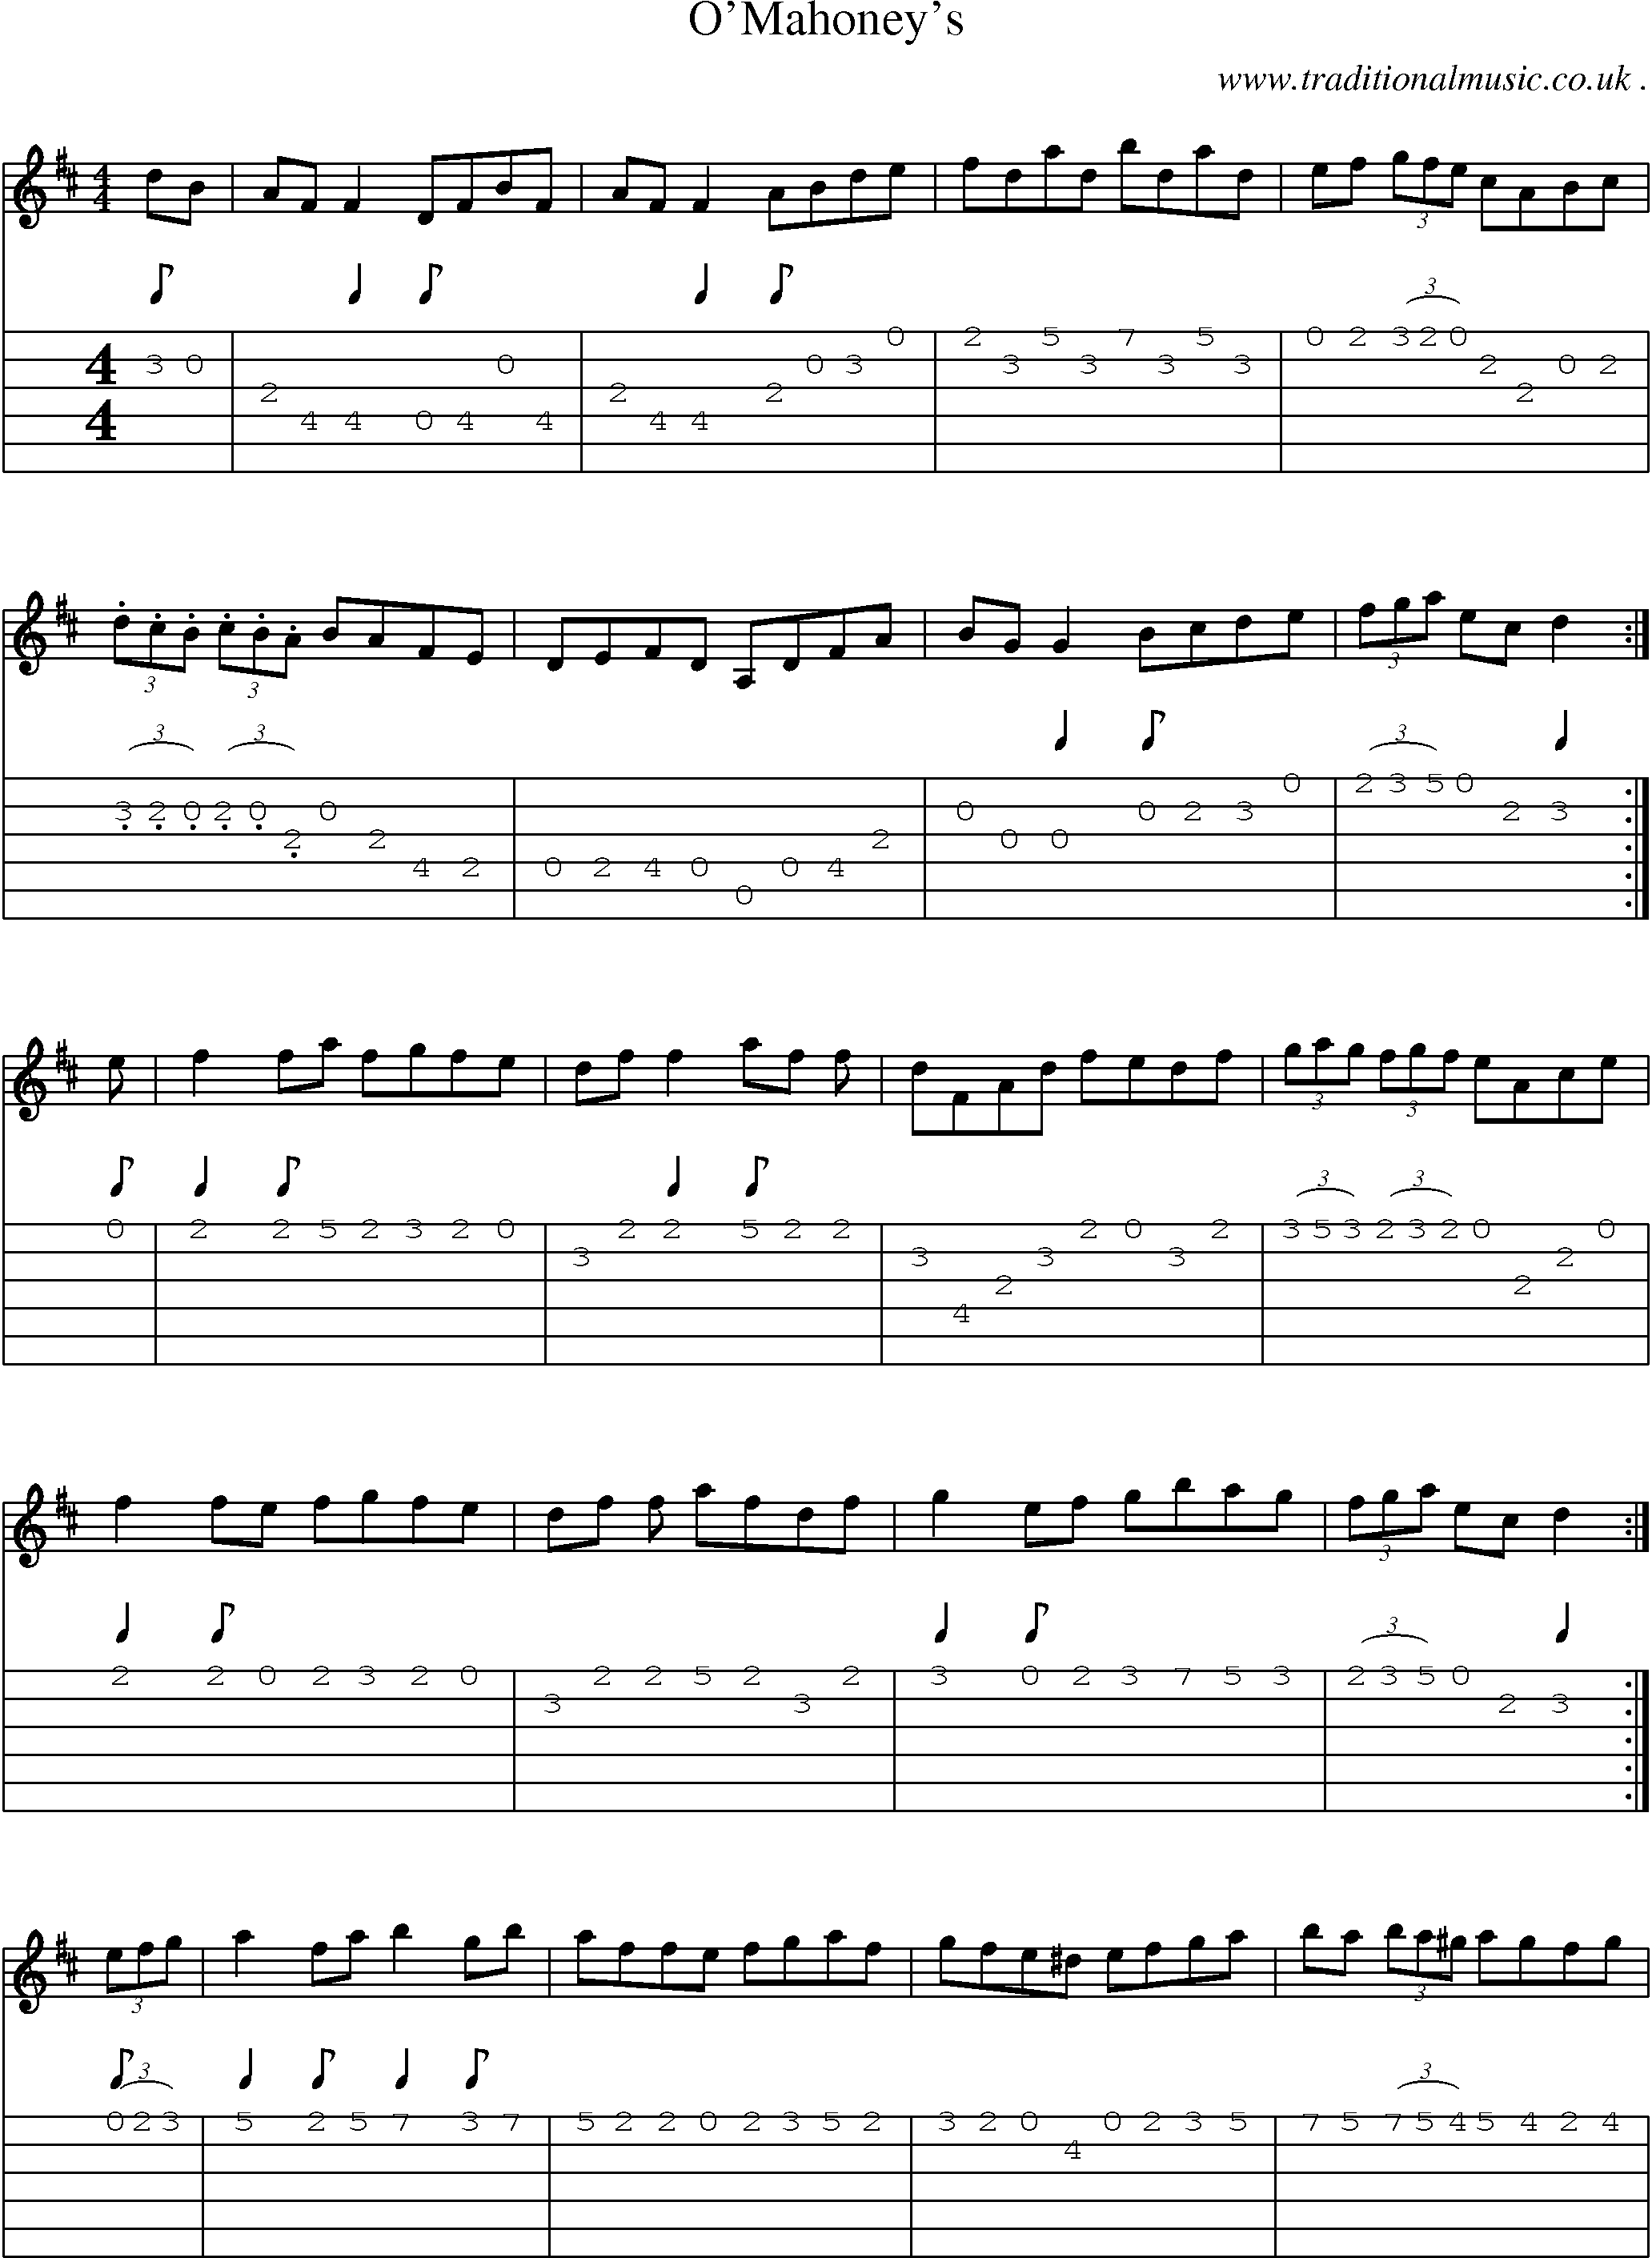 Sheet-Music and Guitar Tabs for Omahoneys